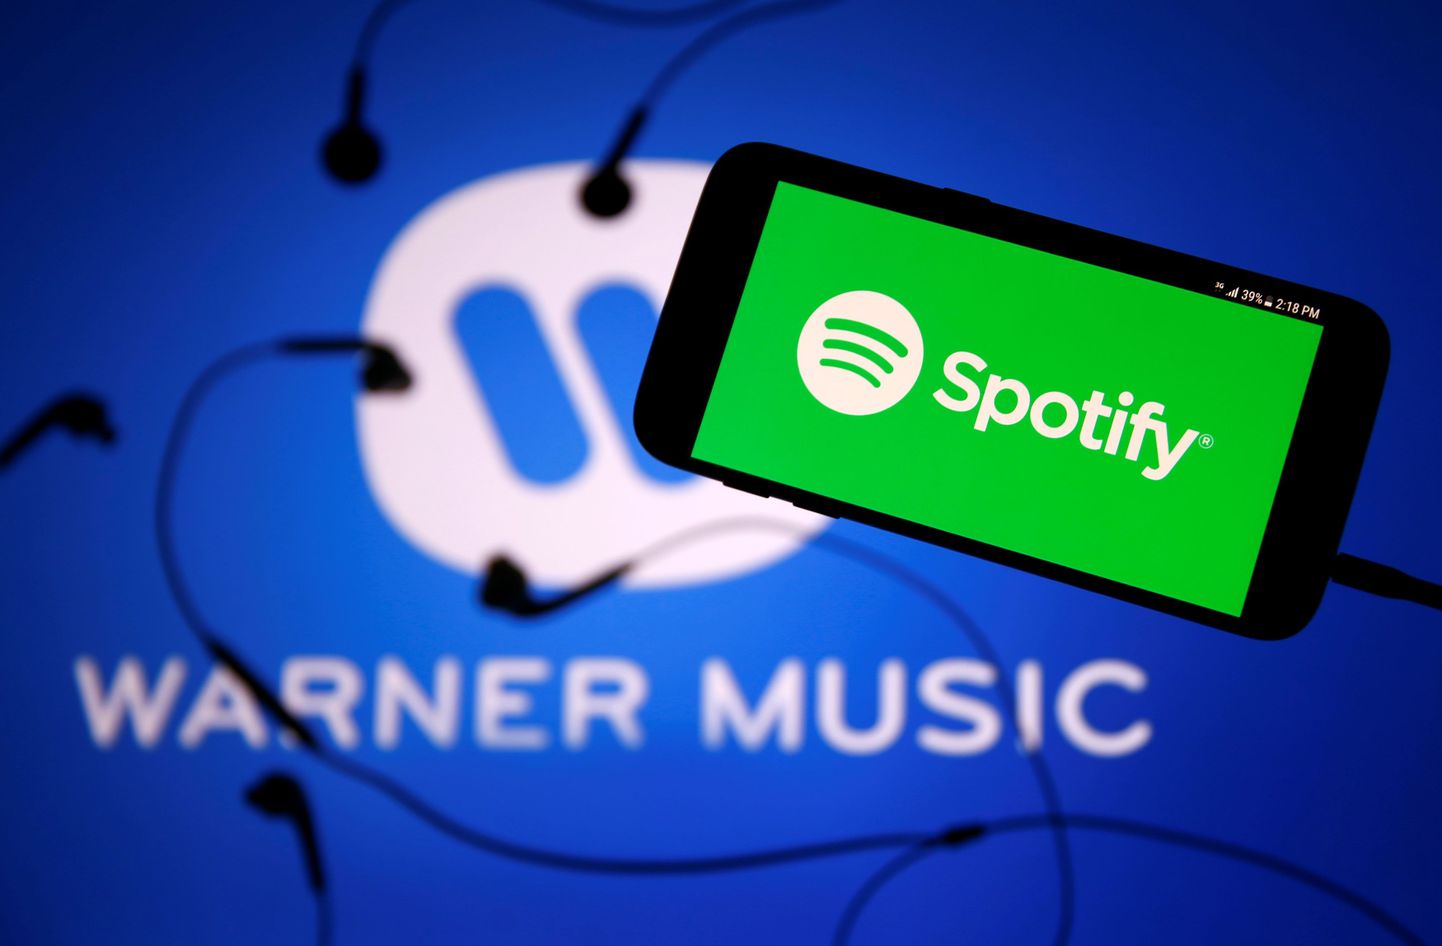 A smartphone with a headset with Spotify logo are seen in front of a displayed Warner Music logo in this illustration picture taken July 24, 2017. REUTERS/Dado Ruvic